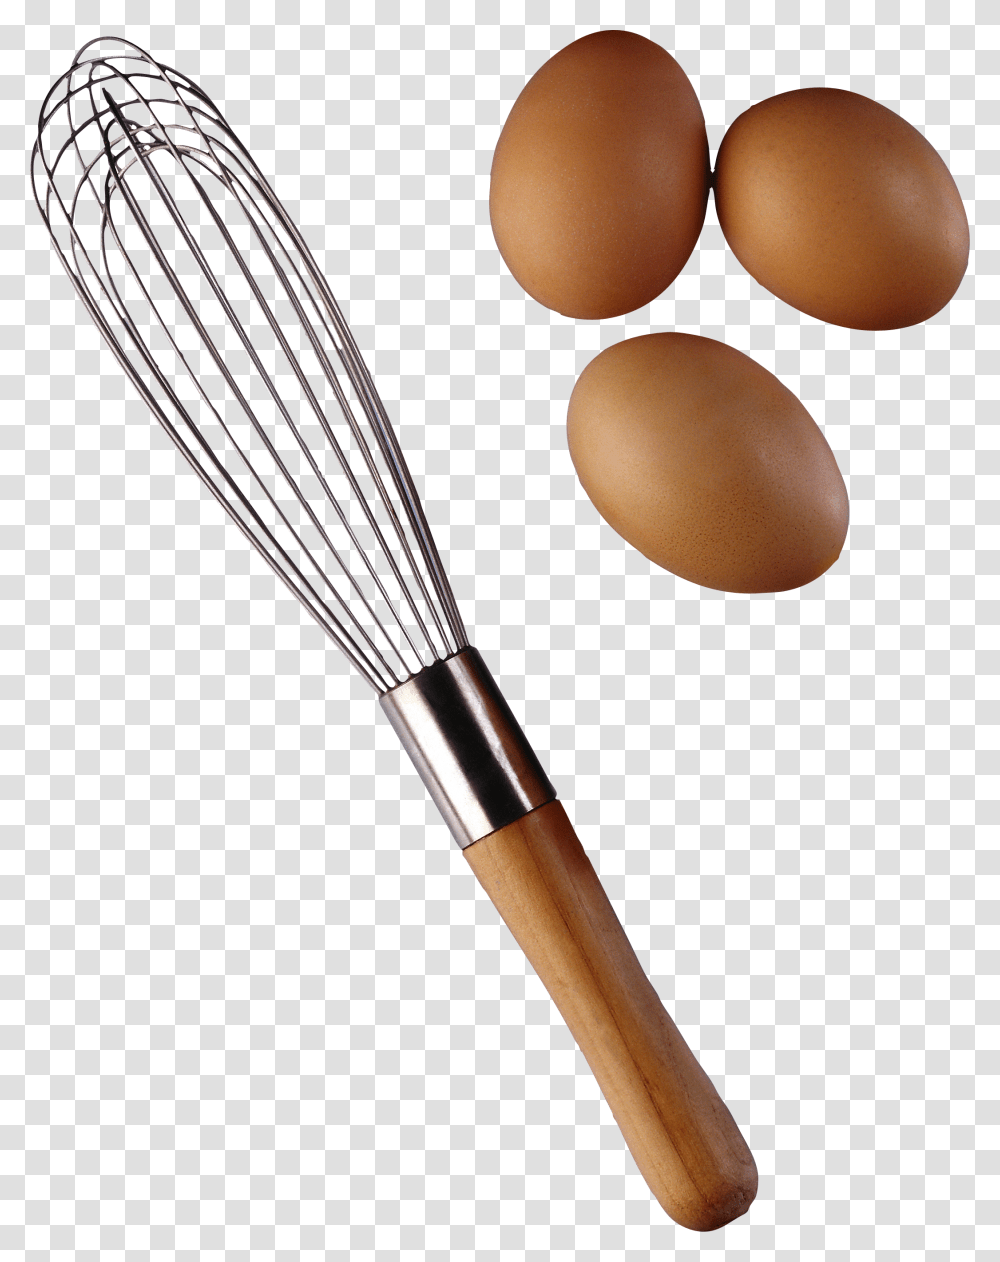 Egg, Food, Spoon, Cutlery, Tool Transparent Png